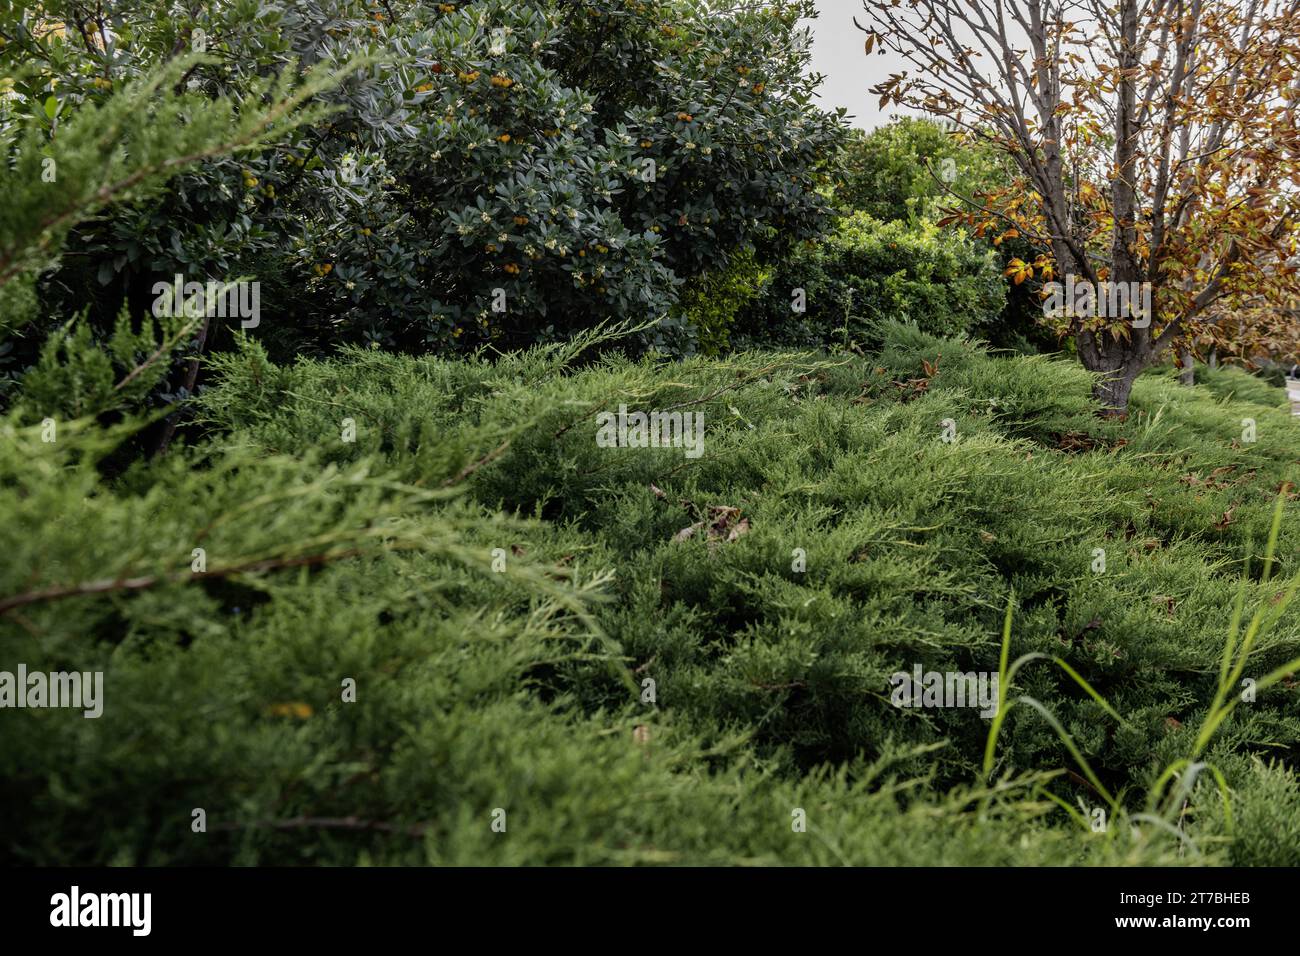 Hedges and trees in an urban park in the city of Madrid Stock Photo